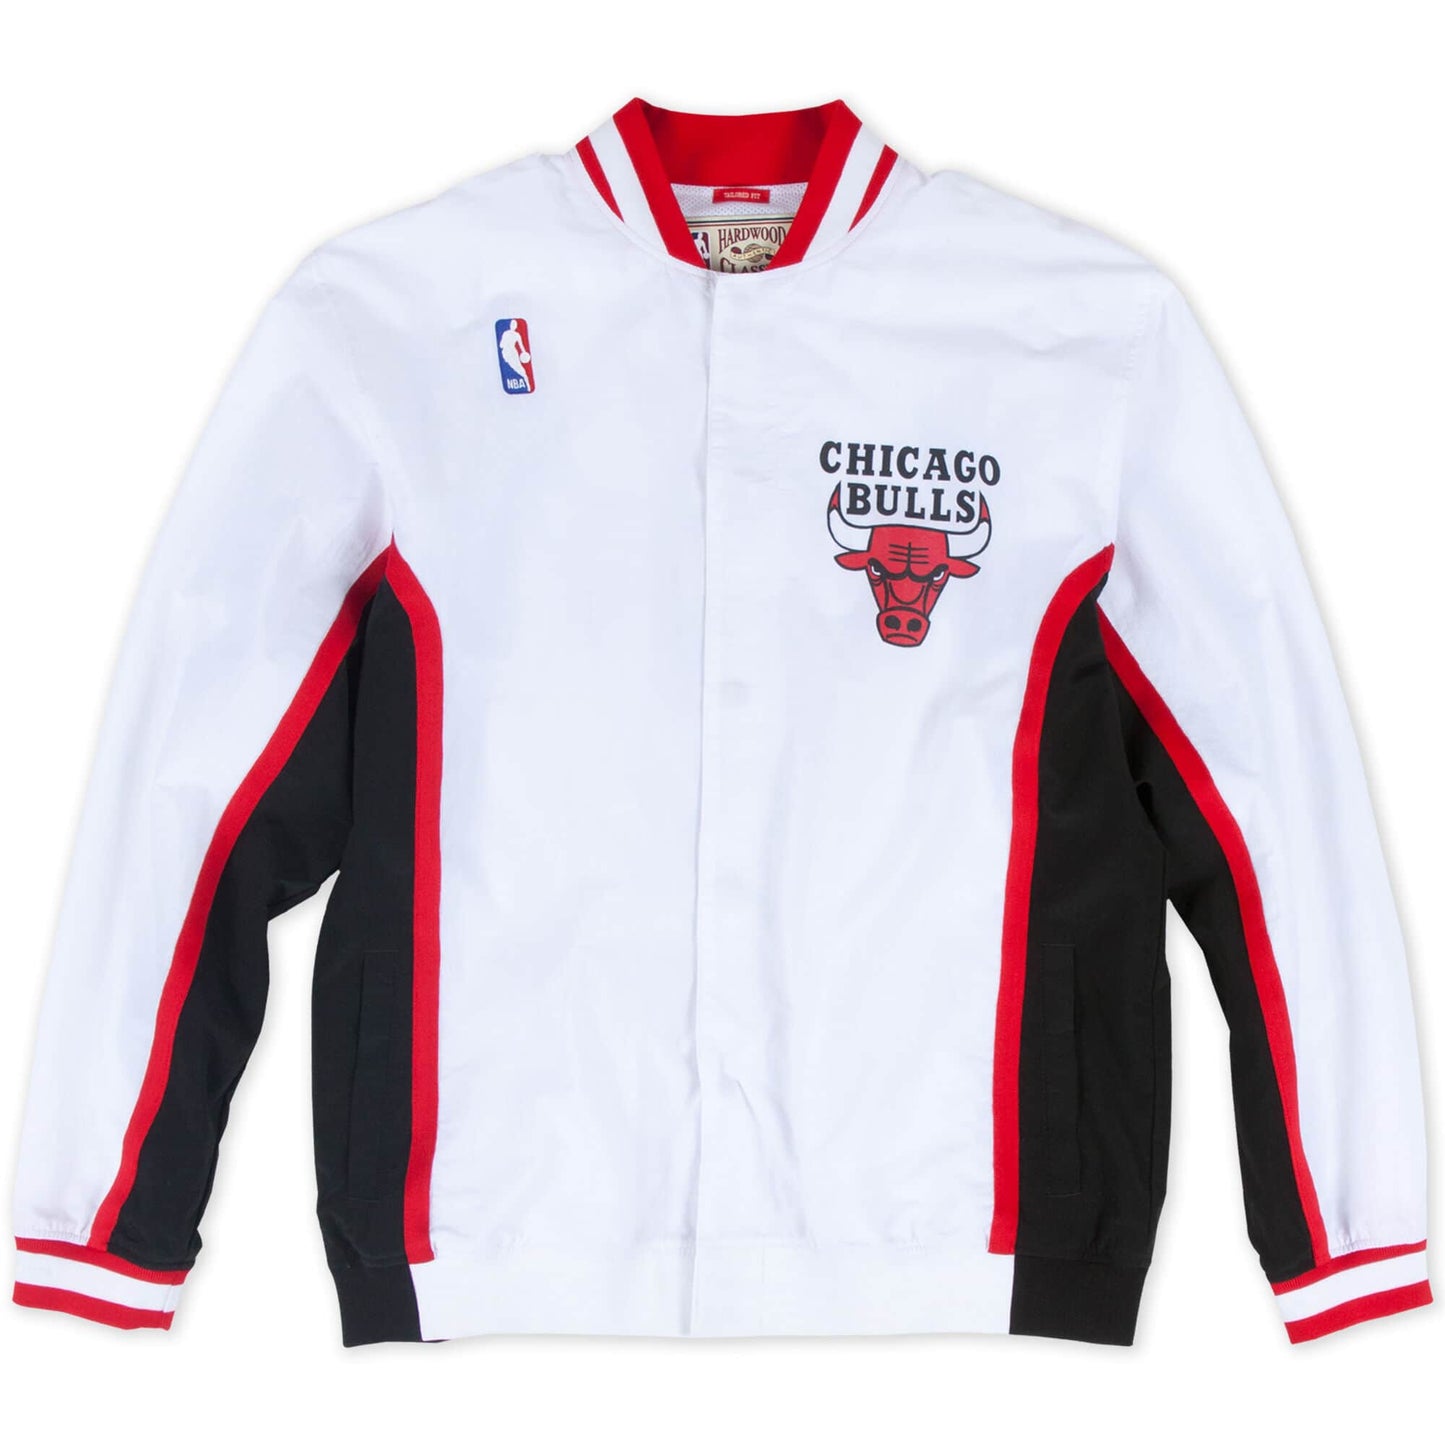 Mitchell & Ness 1992-93 Chicago Bulls Authentic Warm Up Jacket